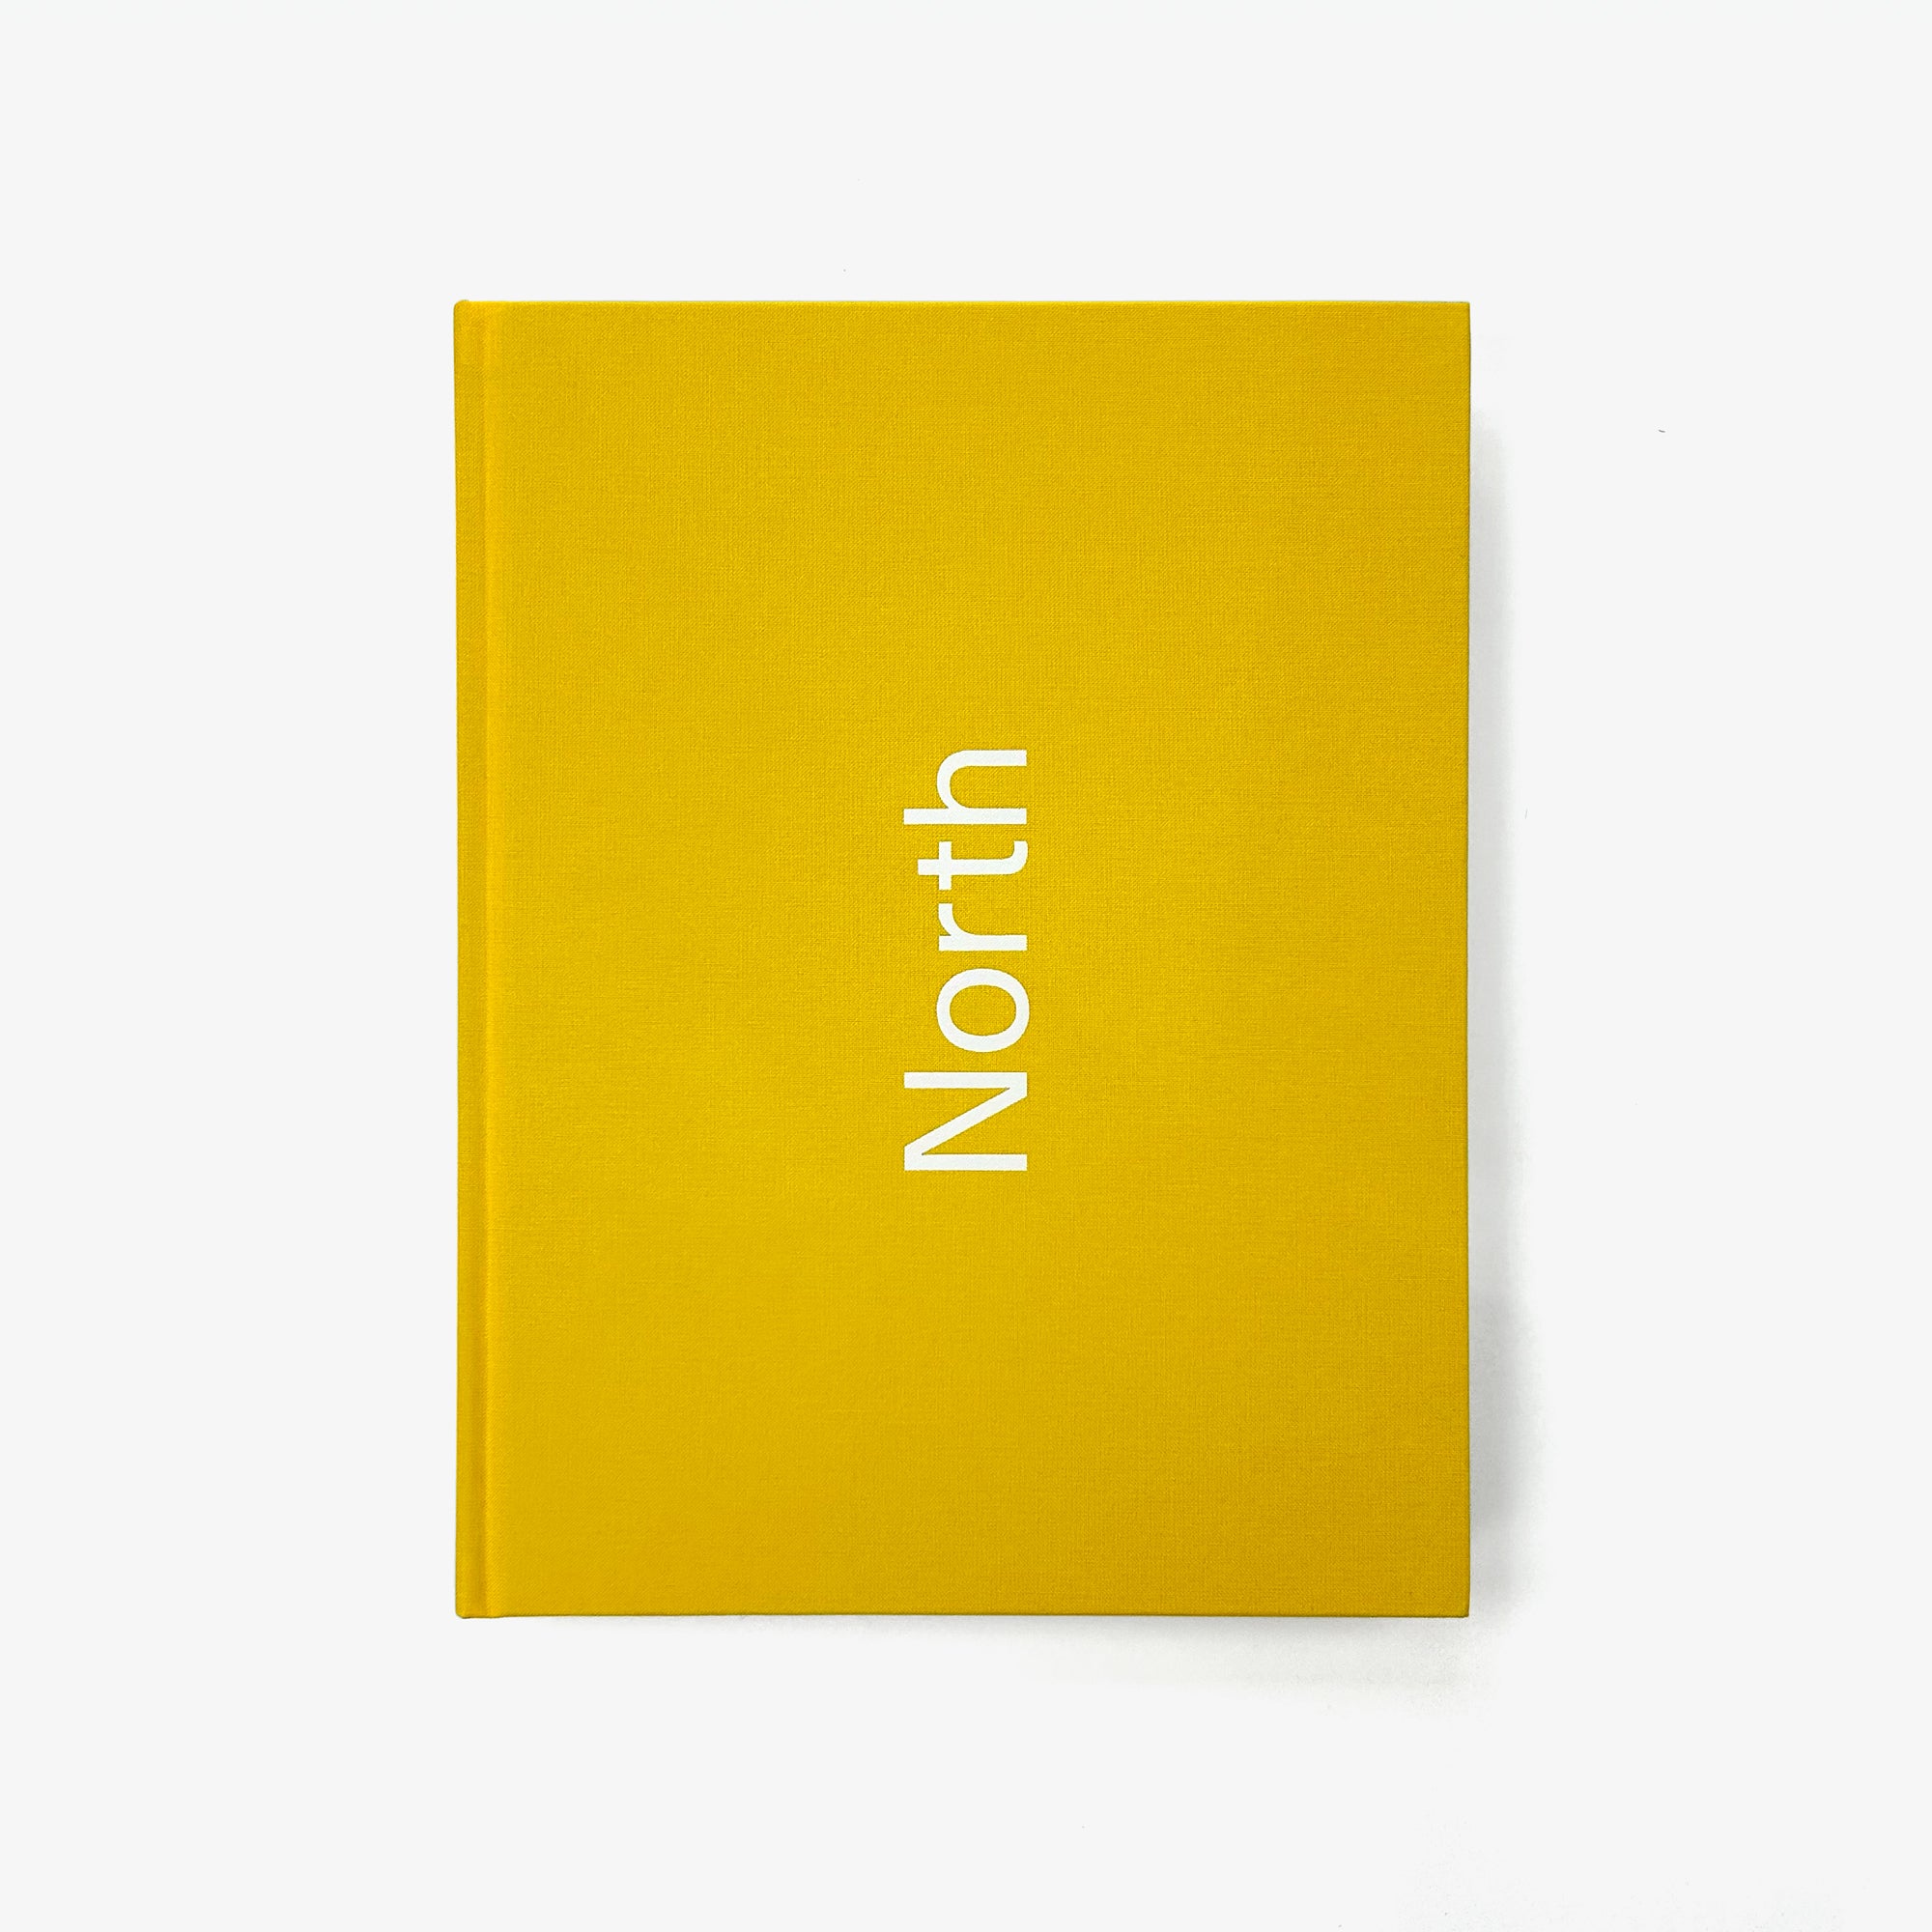 North: Extracts from visual identities – Pre-Order